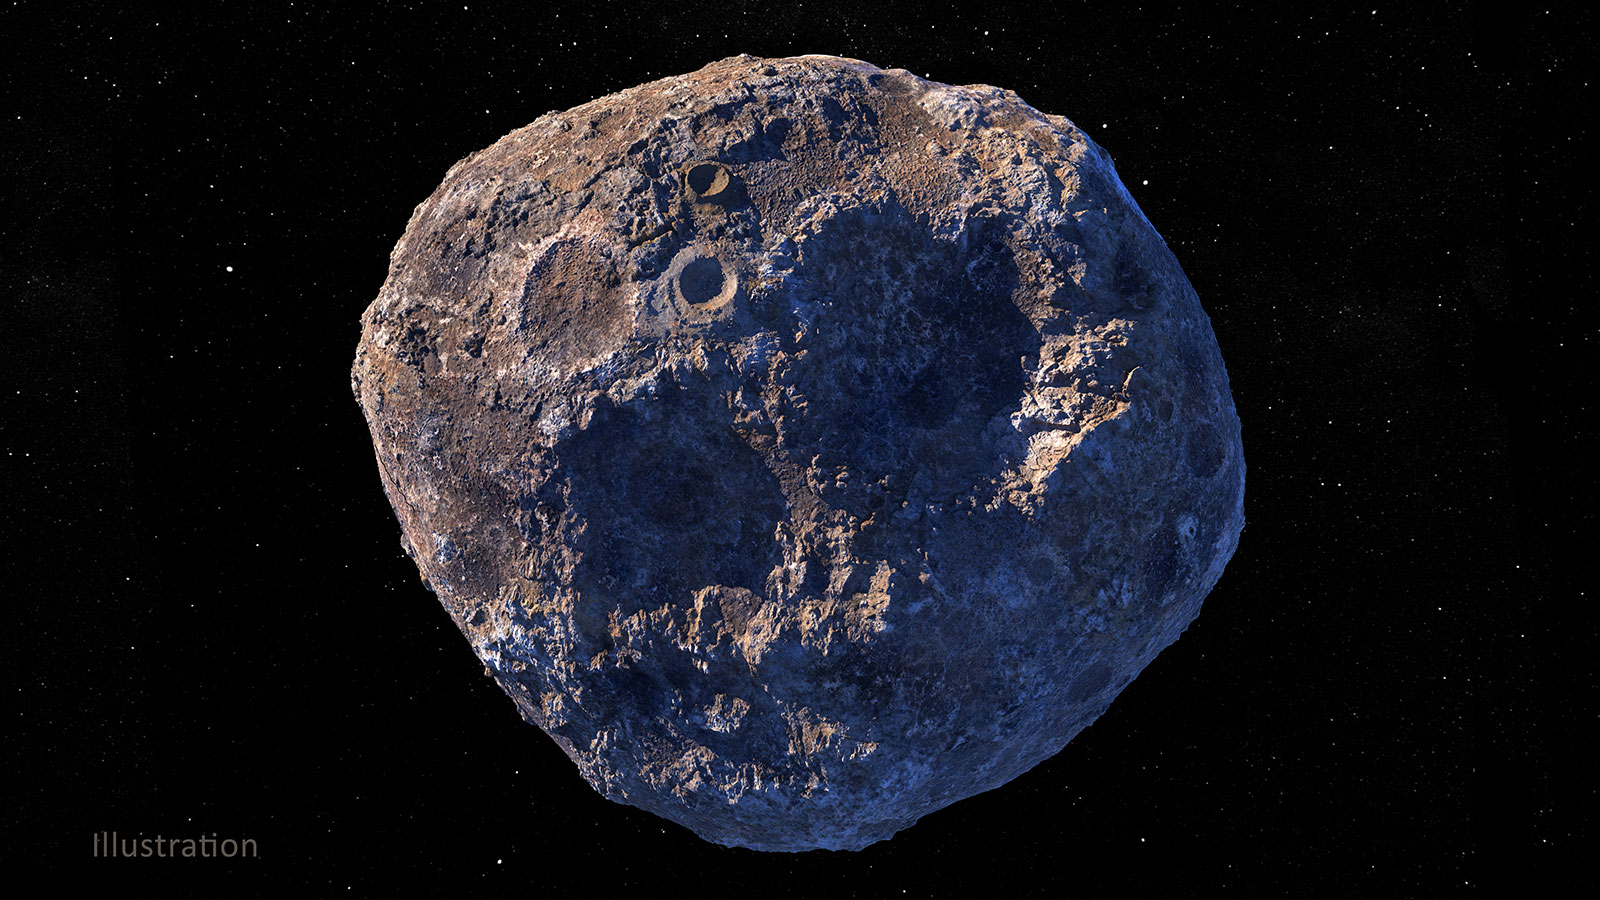 This illustration, created in March 2021, depicts the 140-mile-wide asteroid Psyche, which lies in the main asteroid belt between Mars and Jupiter.